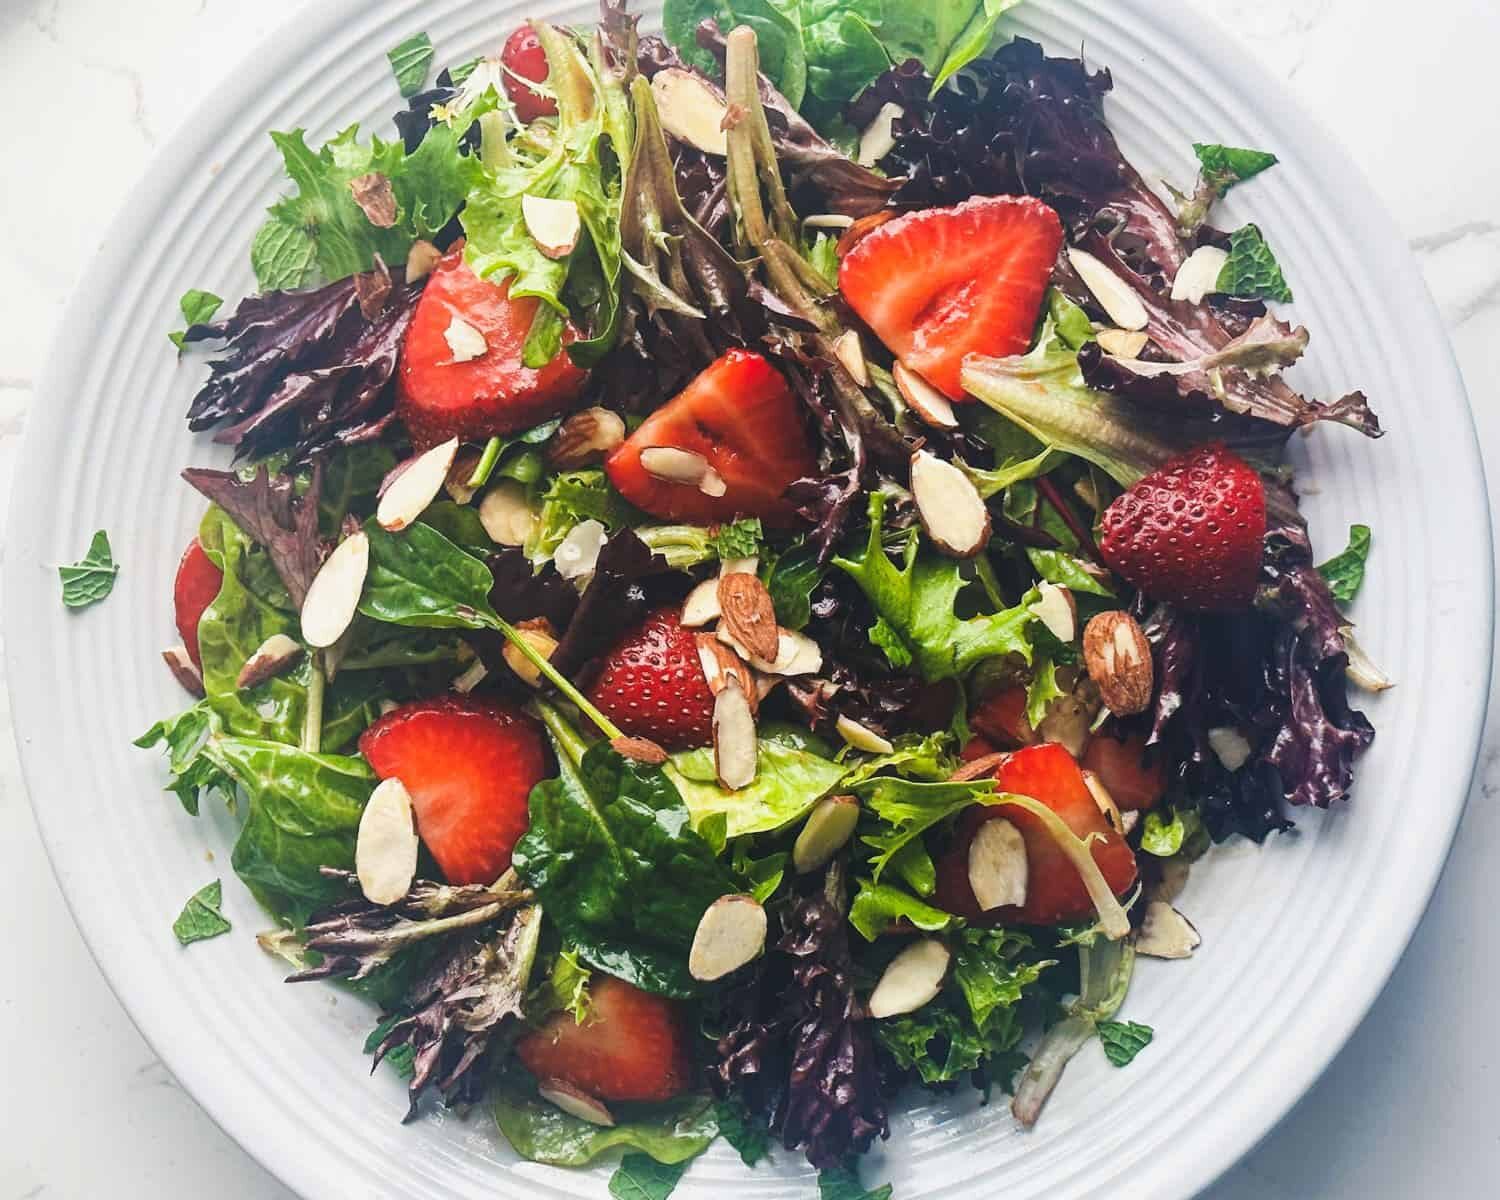 Strawberry spring mix salad with toasted almond slices in large white serving bowl.